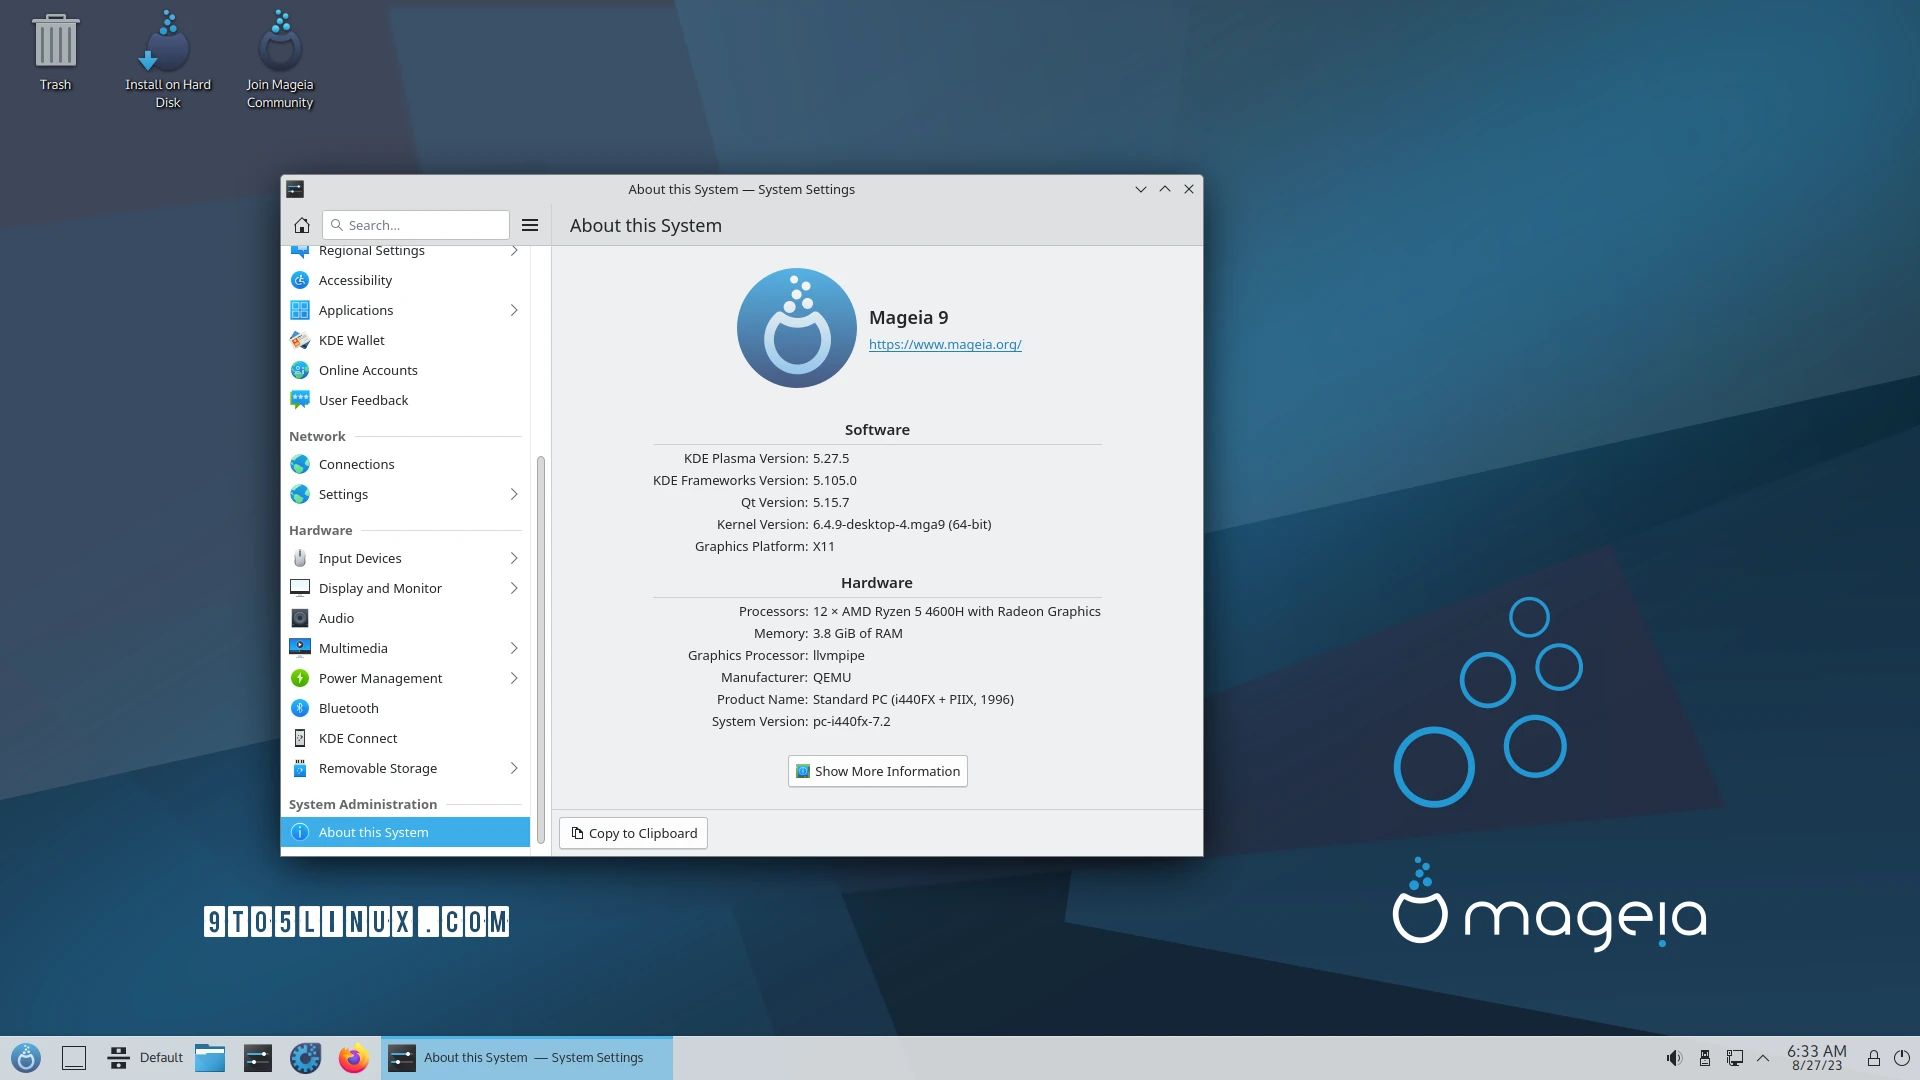 Mageia 9 Officially Released with Linux 6.4, Smaller Disk Footprint, and More